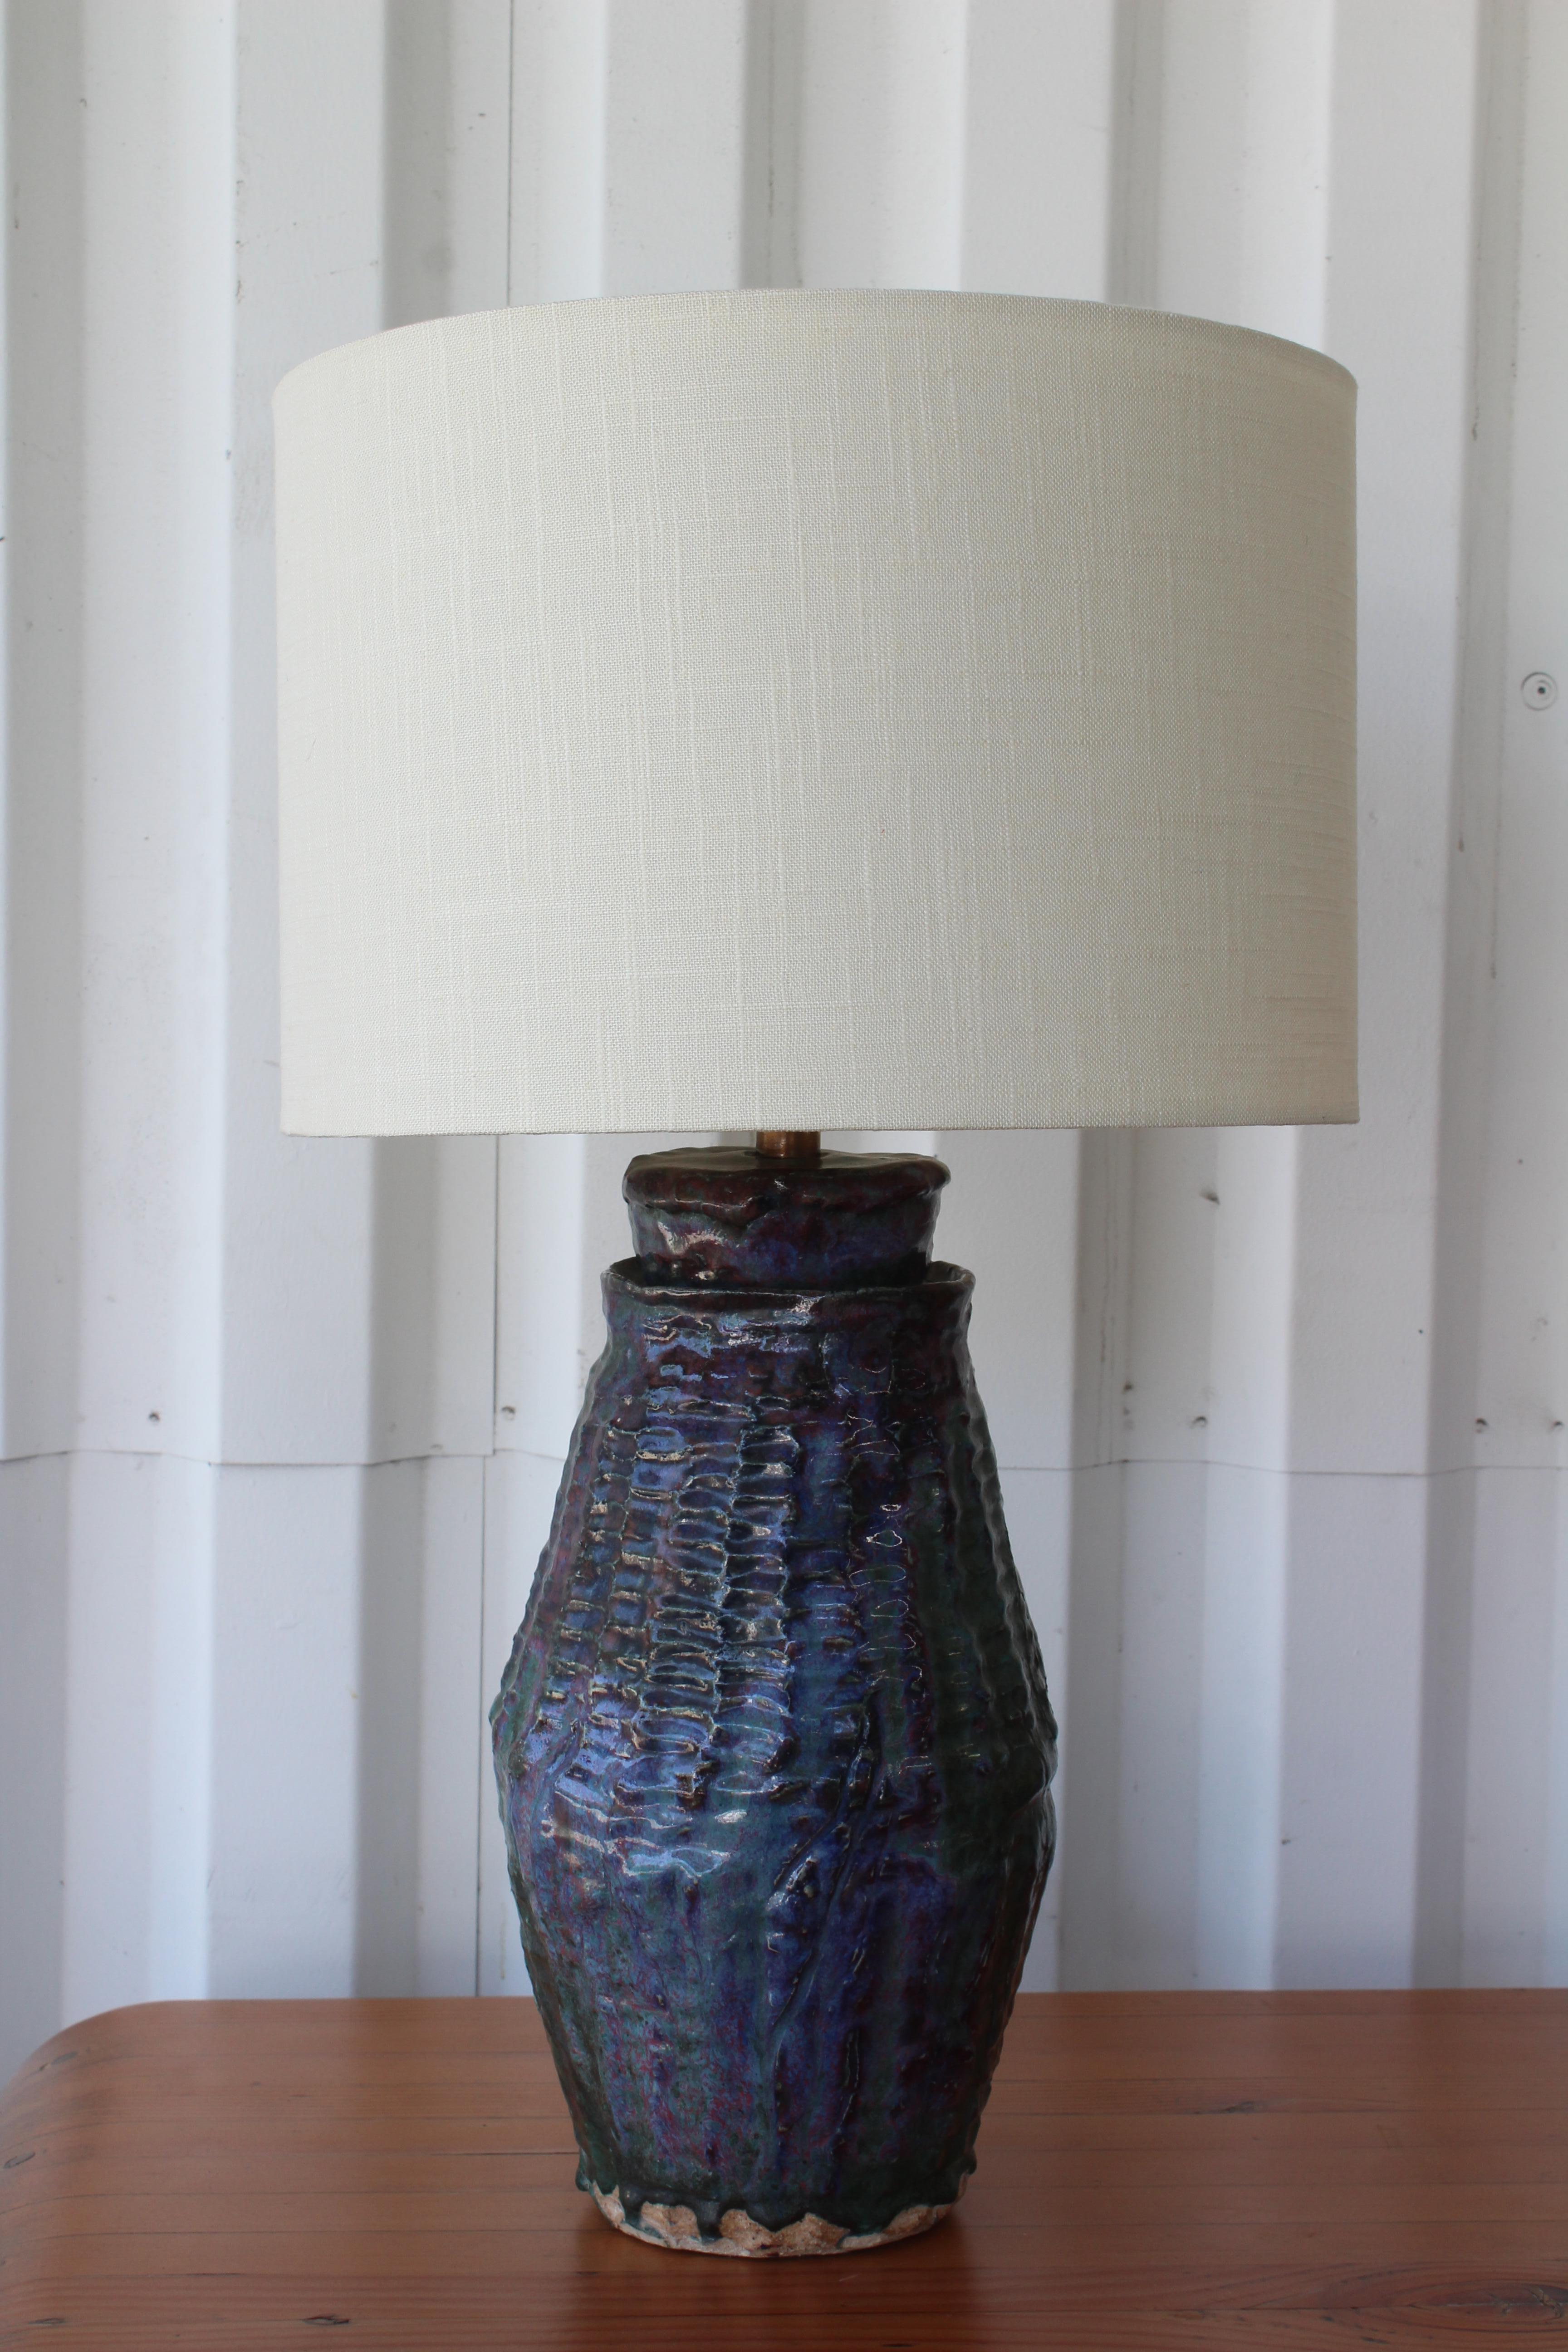 Vintage 1960s studio pottery lamp in a purple and blue glaze. Newly rewired and new custom shade in Belgian linen. 24